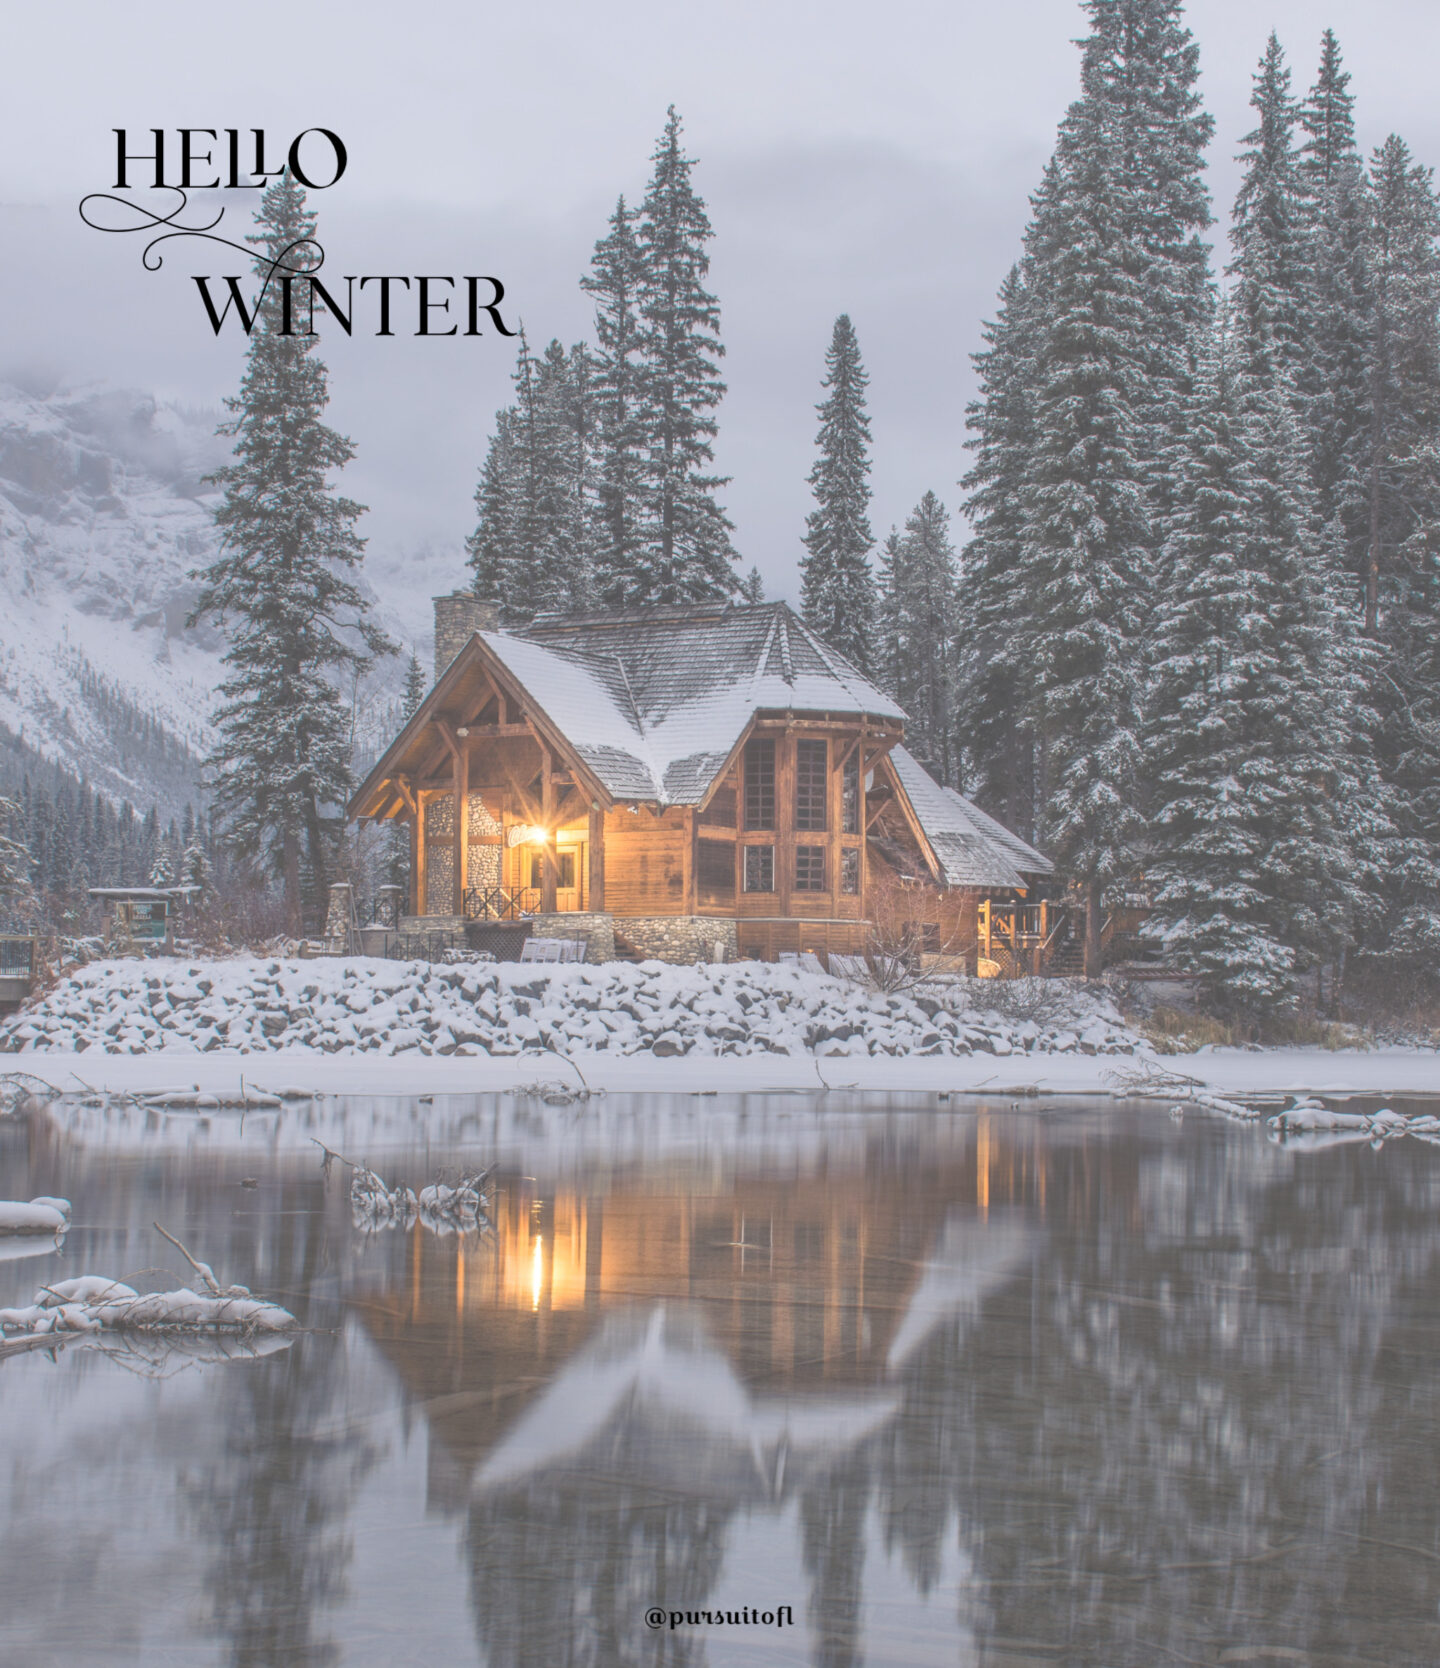 Winter tablet wallpaper with log cabin on a lake in a snowy forest with hello winter text